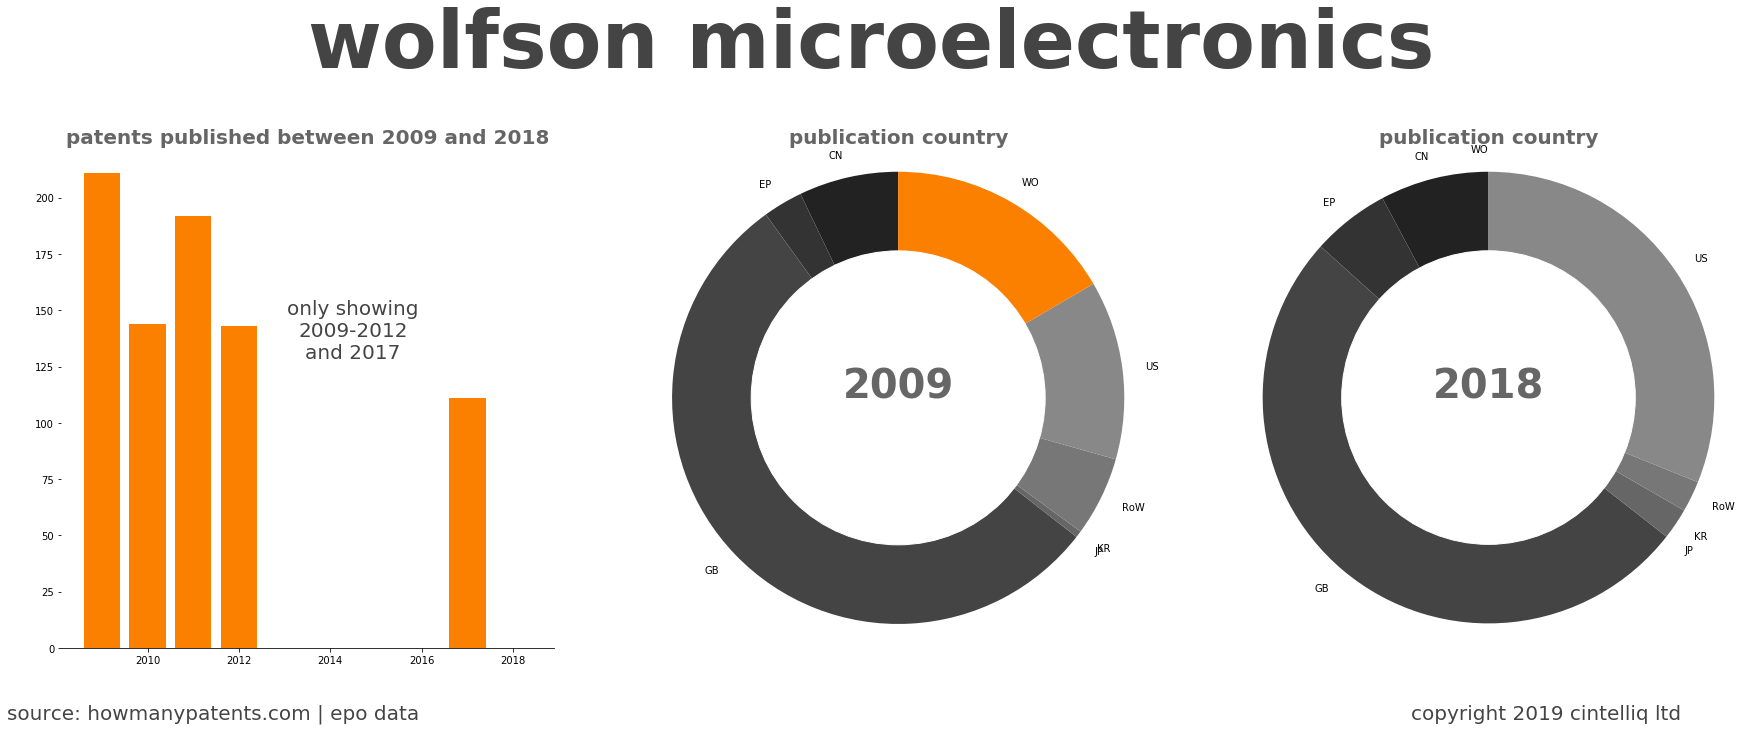 summary of patents for Wolfson Microelectronics